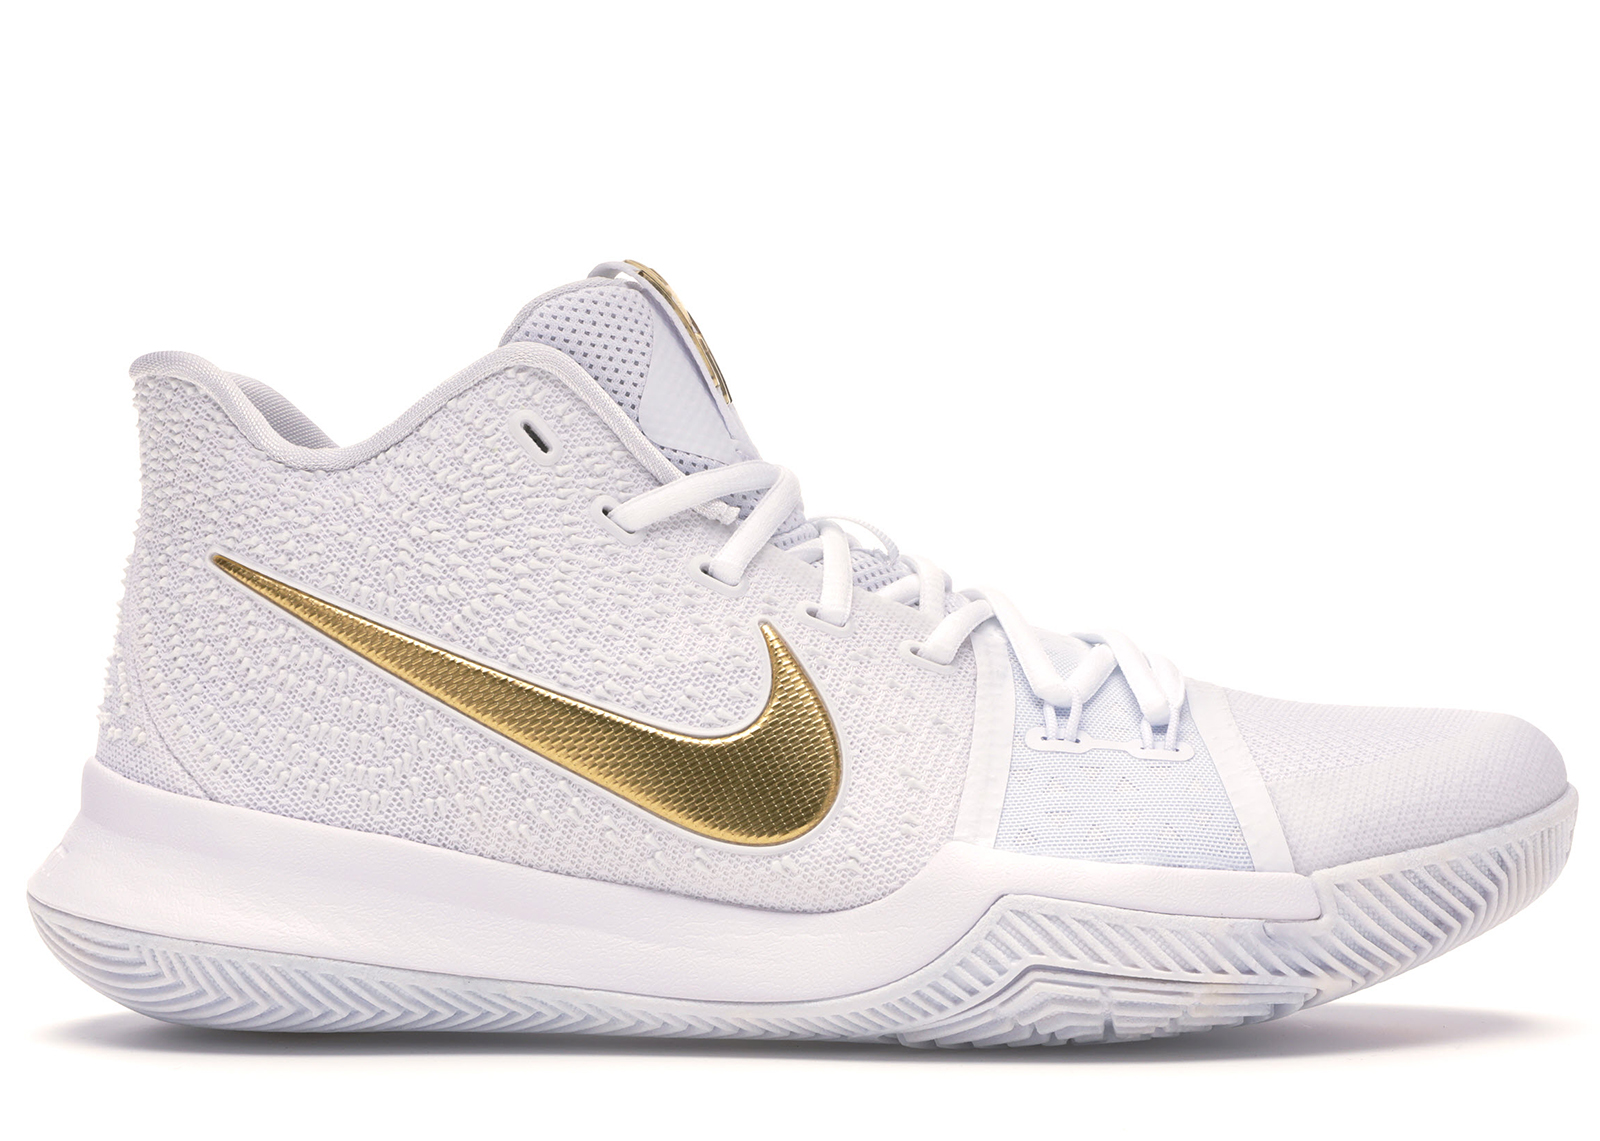 Nike Kyrie 3 Finals Gold - 852395-902